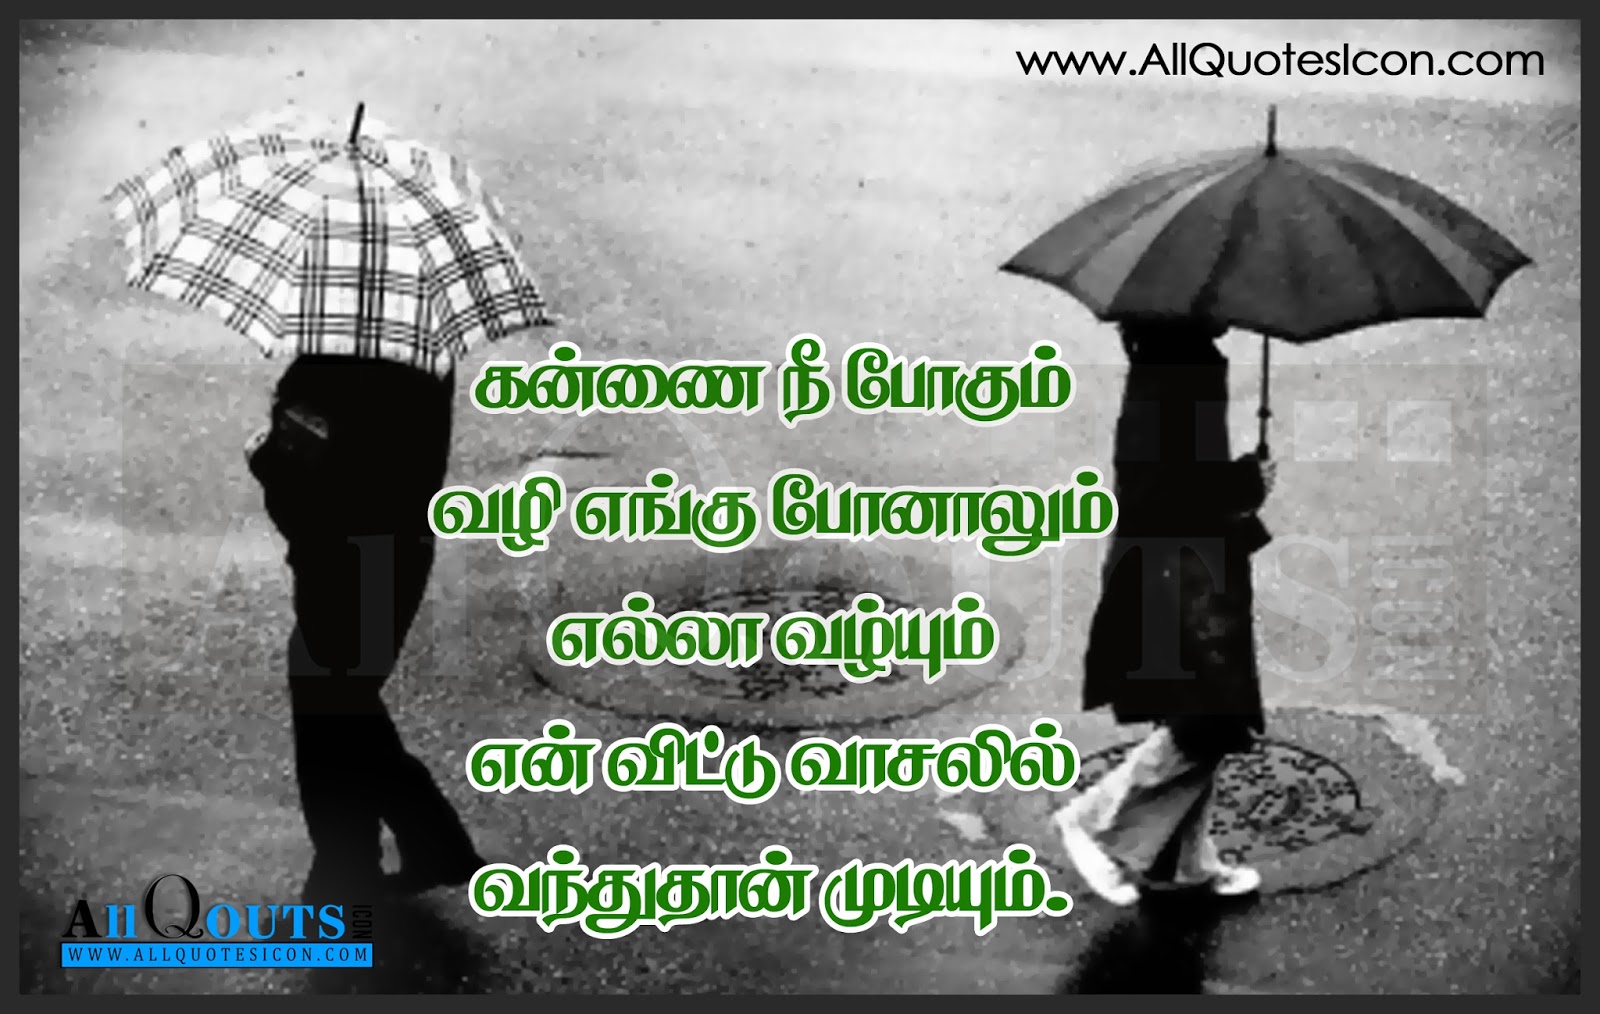 Tamil Love Quotes Motivation Inspiration Thoughts Sayings